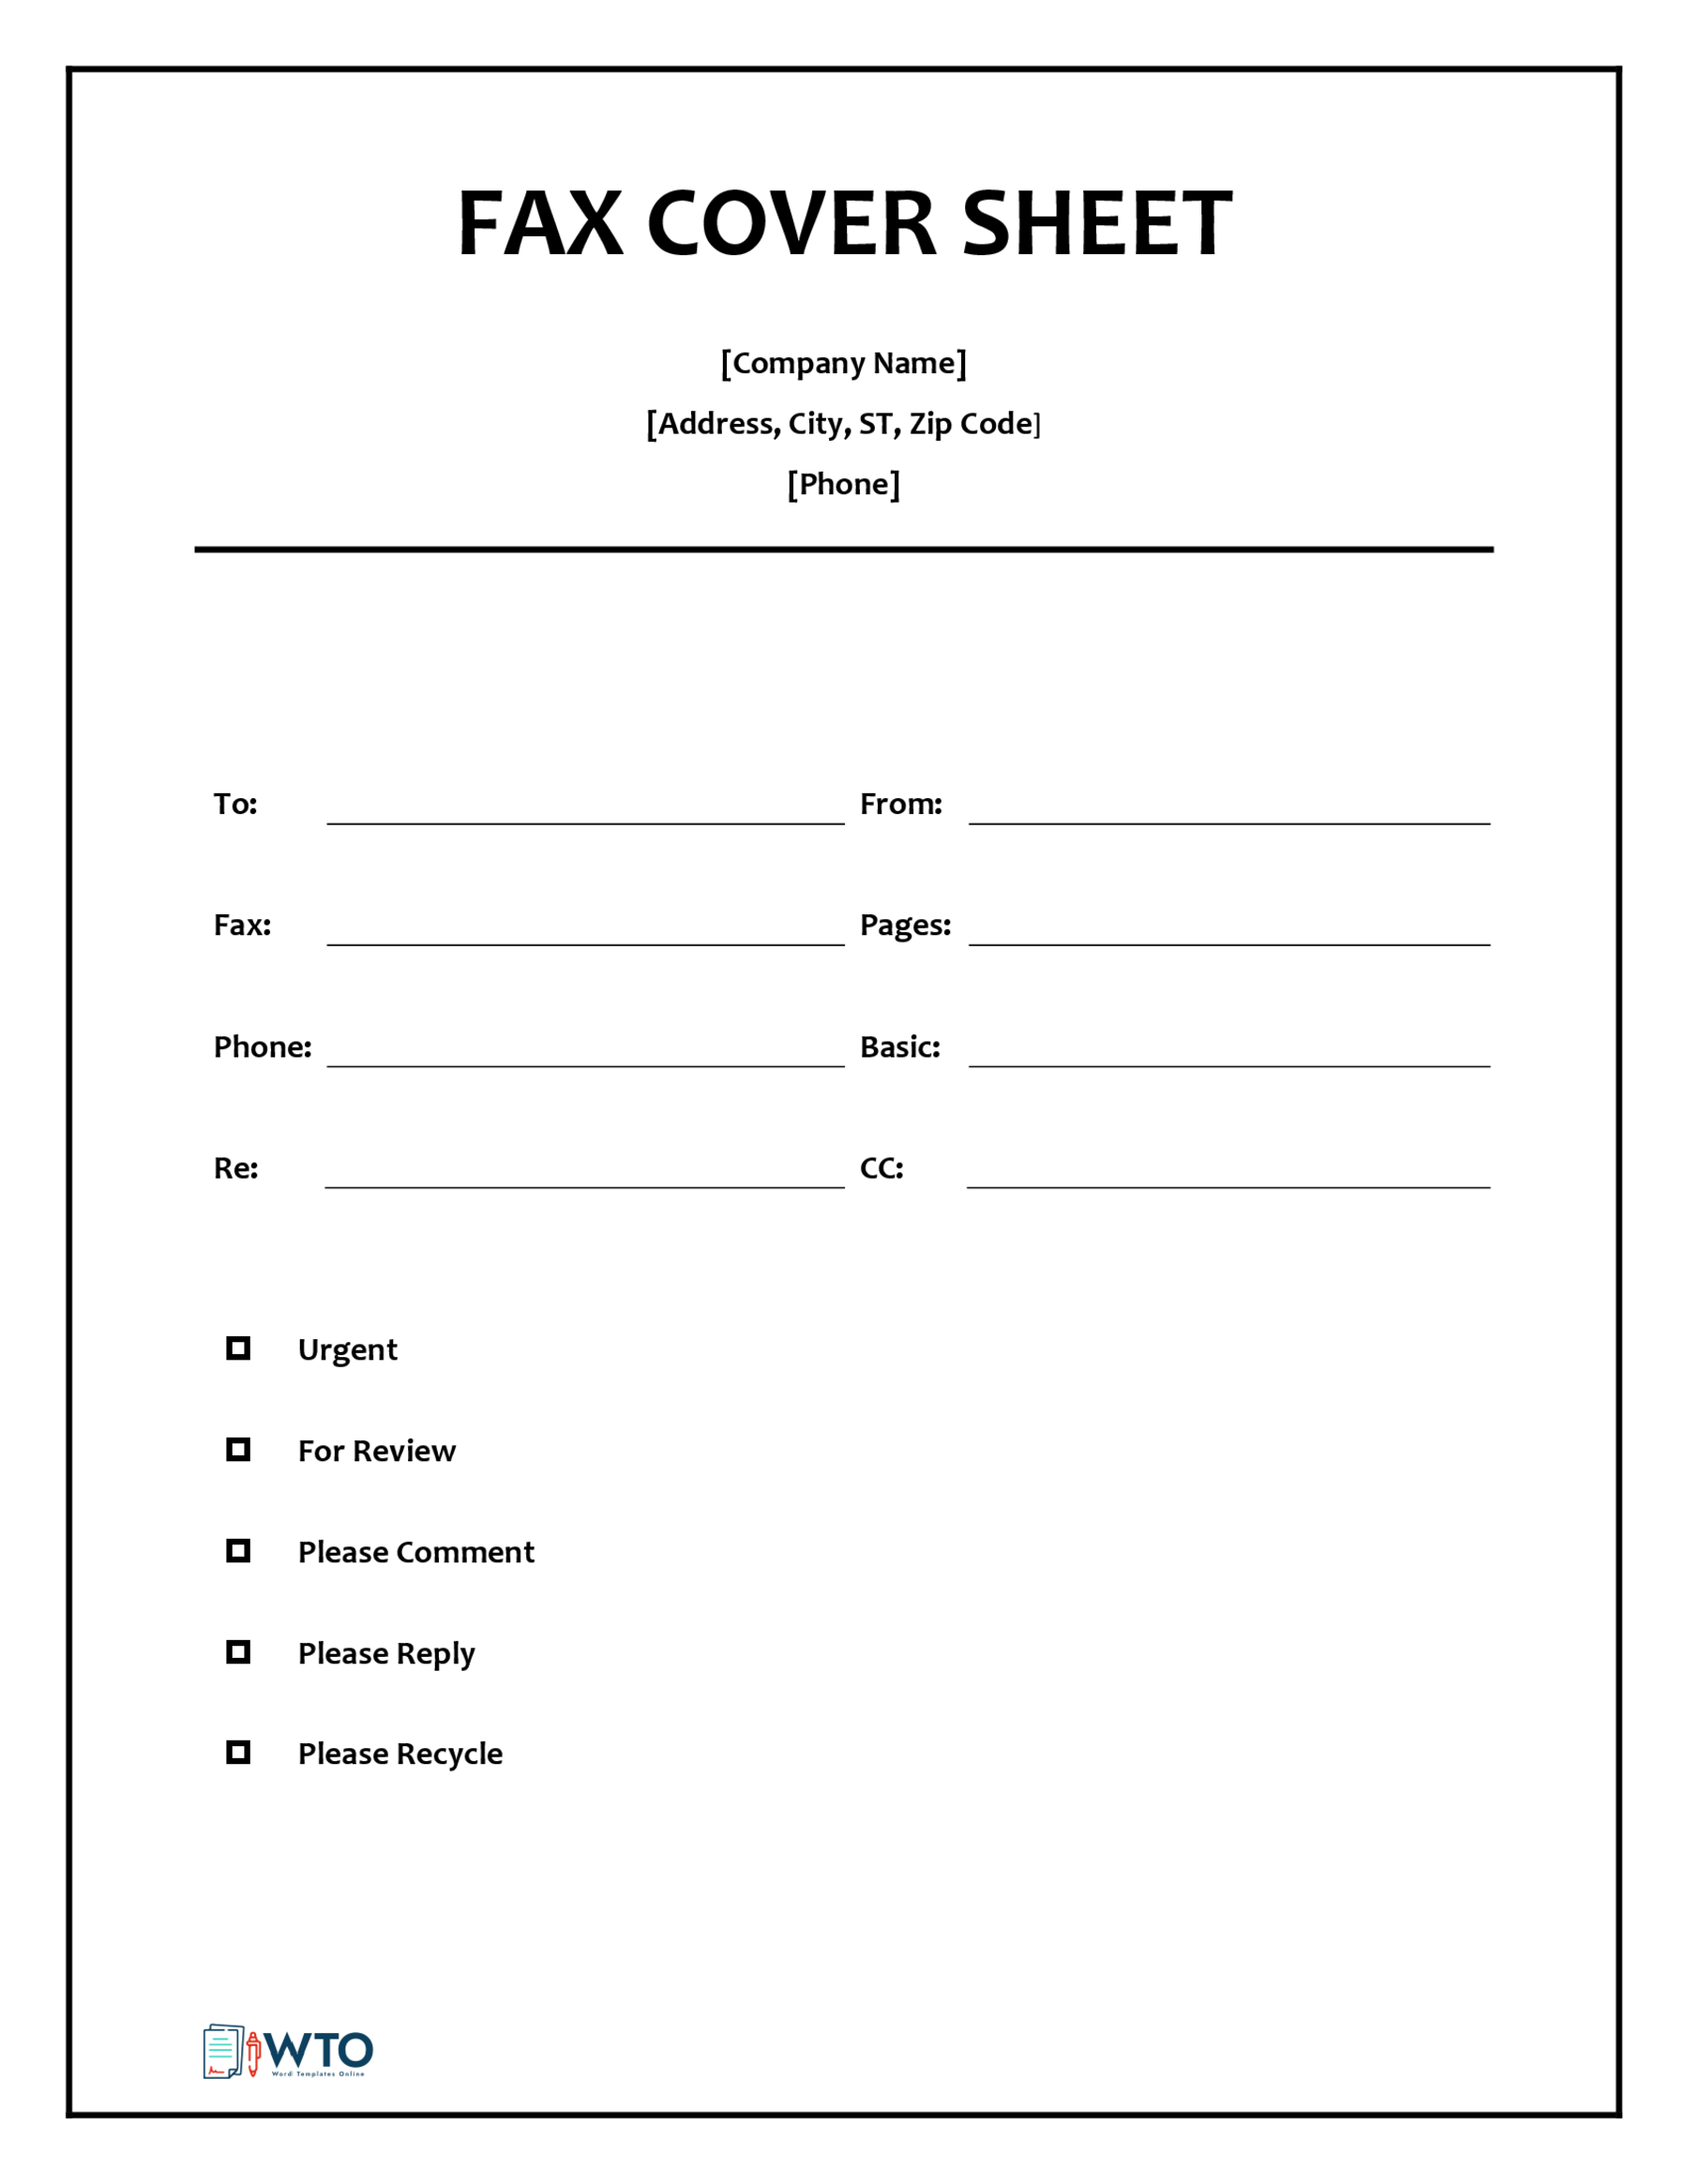 Download Free Fax Cover Sheet Template